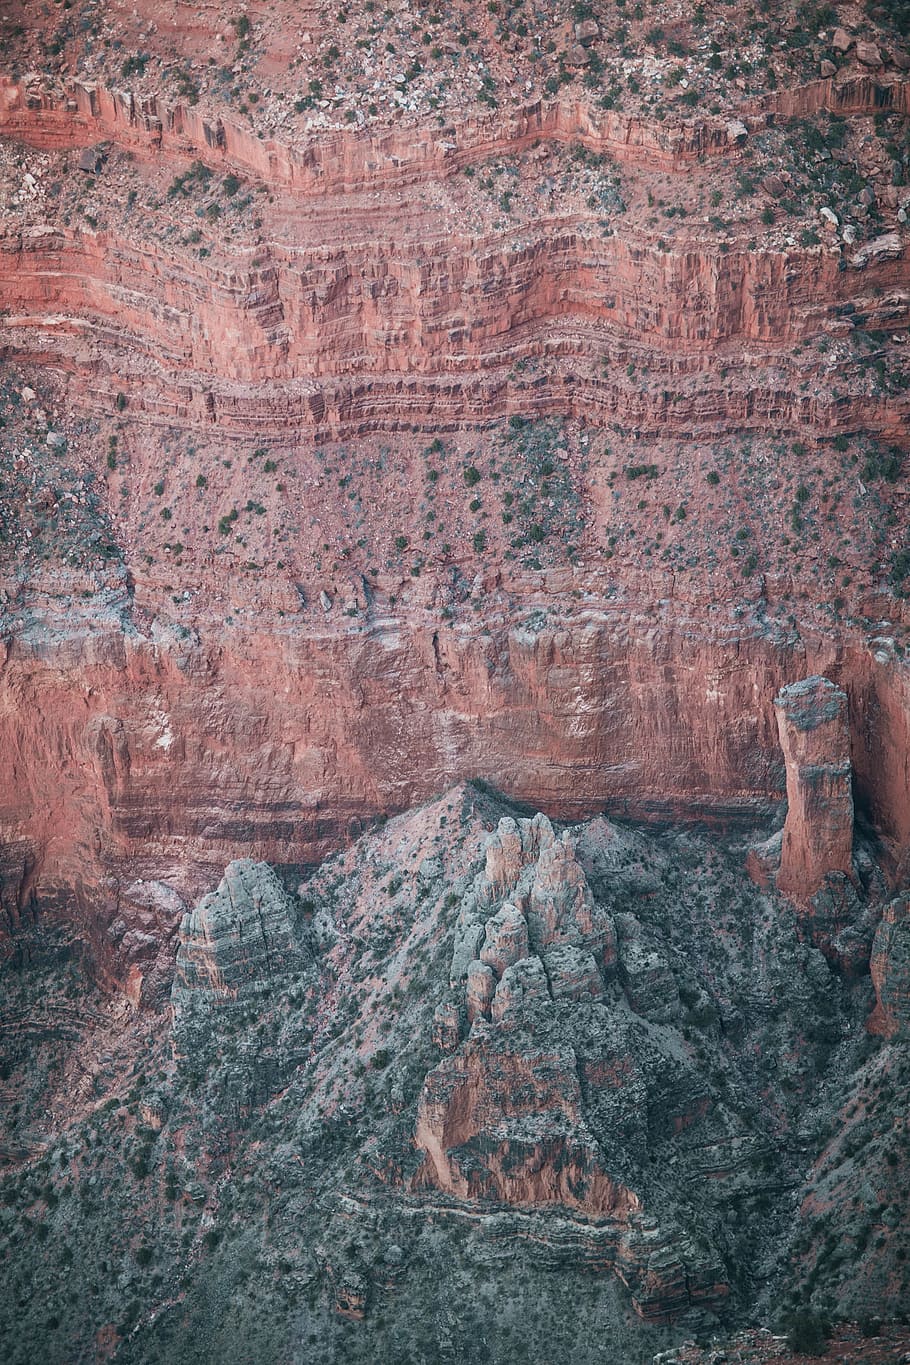 portrait view, grand, canyon, layered, rock formations, day time, adventure, arizona, desert, erosion